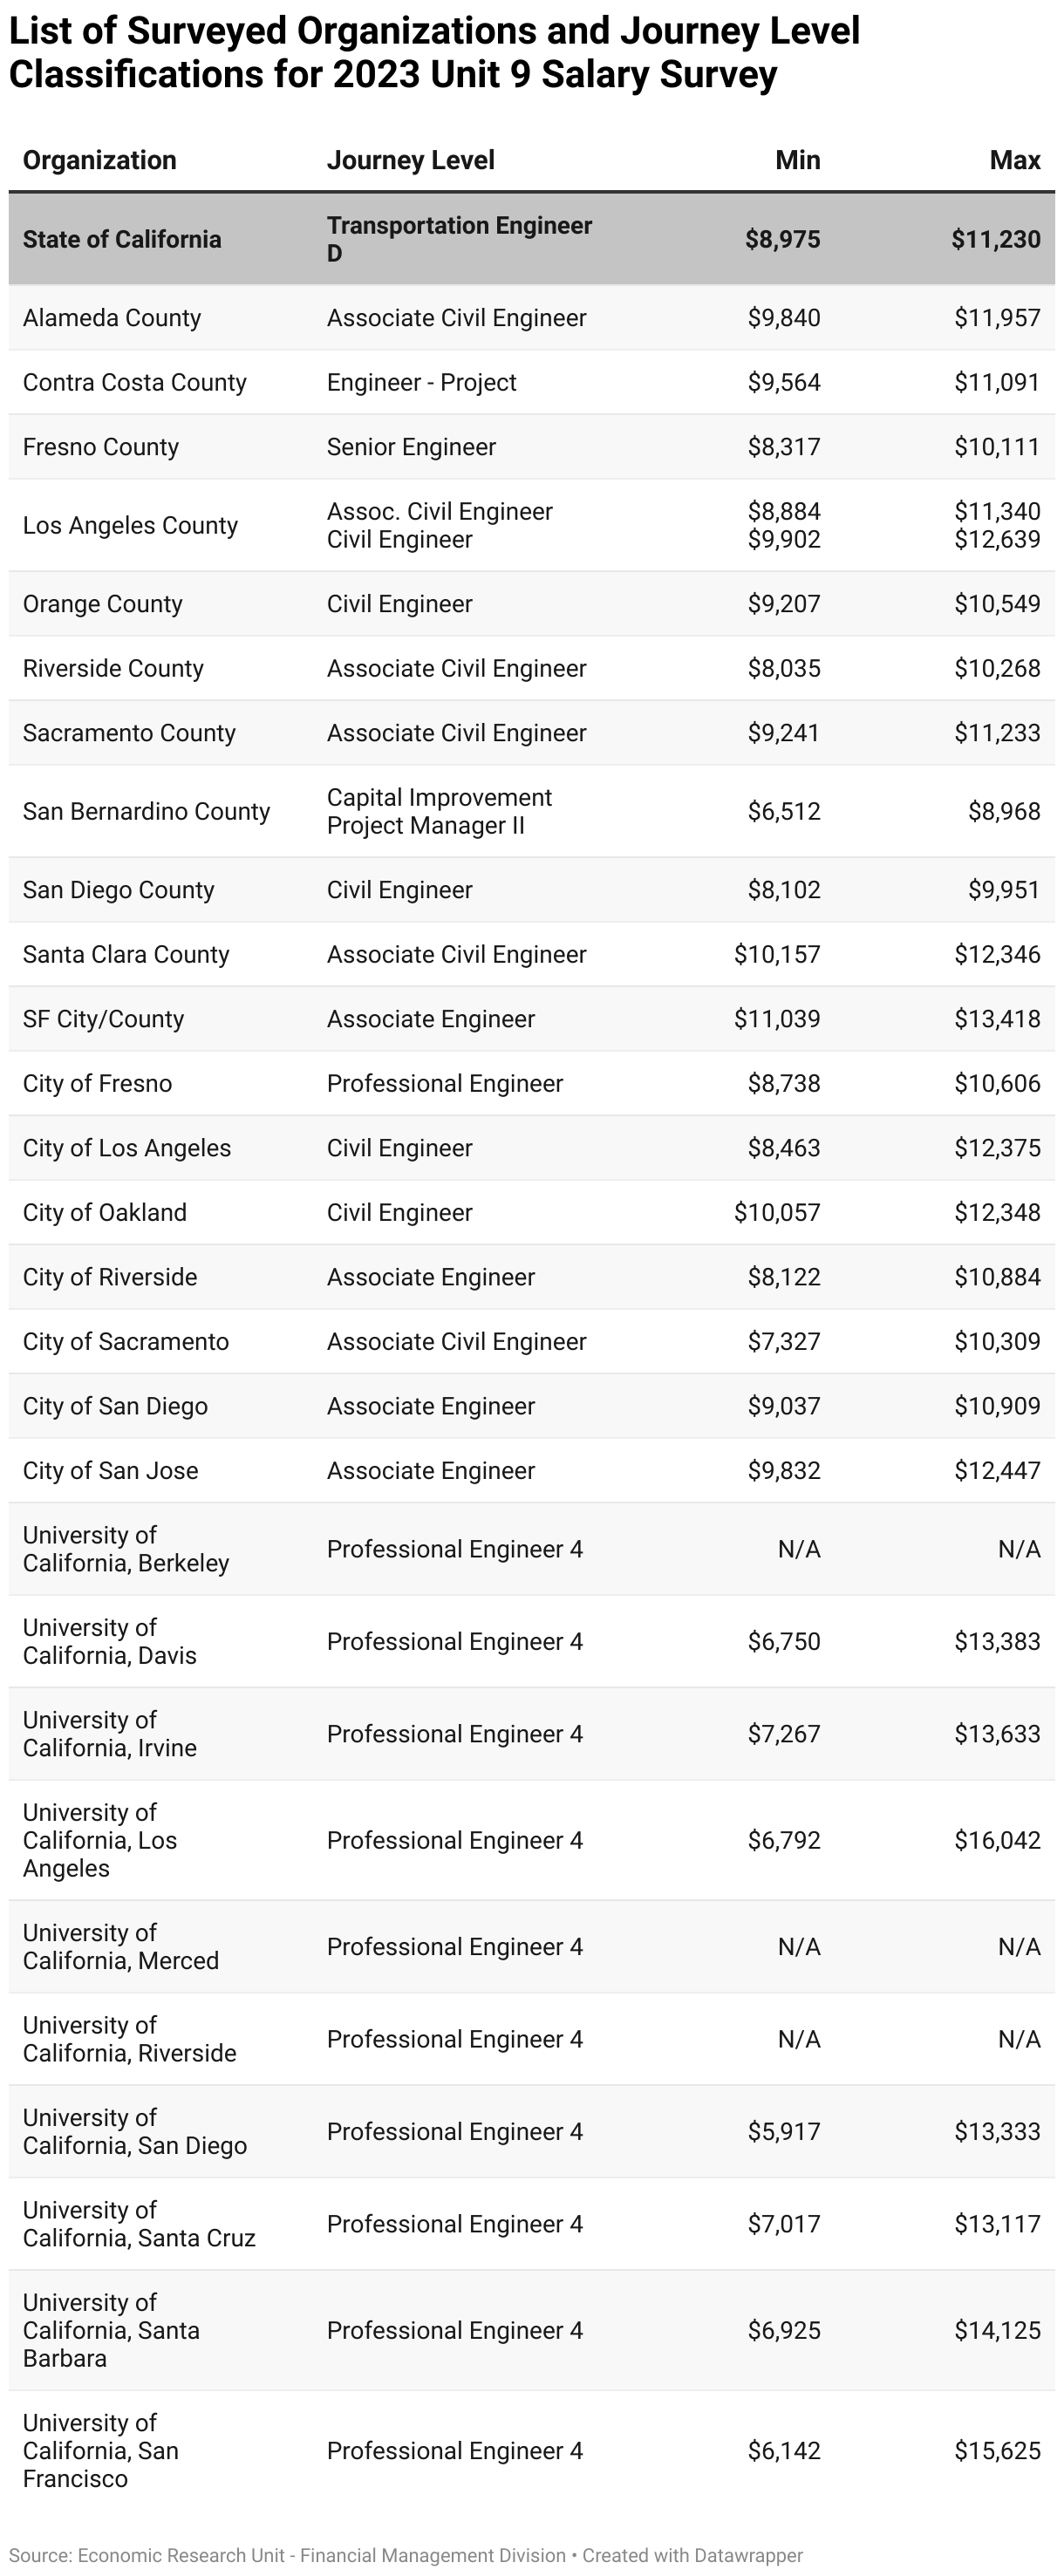 The following chart shows the minimum and maximum salaries for the journey level classifications for the different organizations involved in the Unit 9 Salary Survey. The State of California entry level position is Transportation Engineer D and has a minimum salary of $8,975 and a maximum salary of $11,230. Many of the organizations in the Unit 9 Salary Survey have a higher minimum salary and a higher maximum salary for their entry level classification than the State.